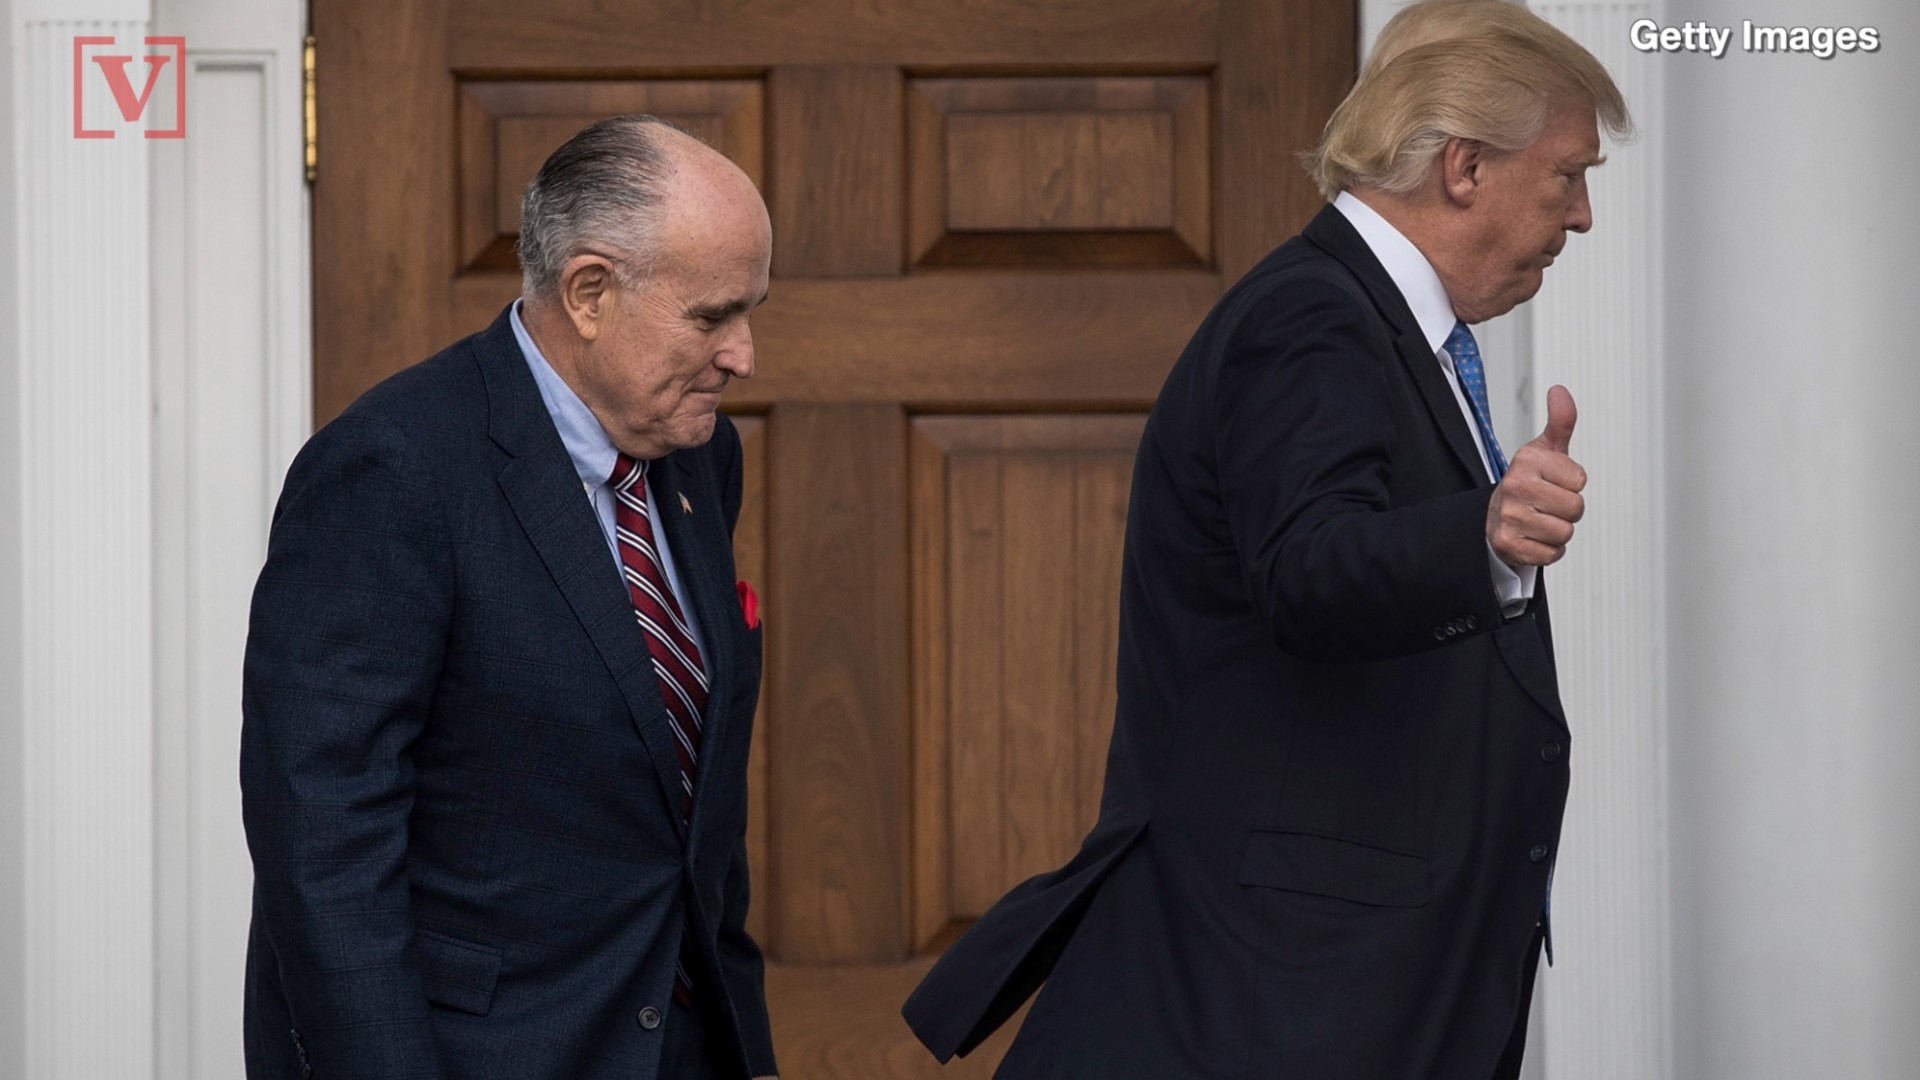 President Trump's personal lawyer Rudy Giuliani is back making headlines, telling CNN that he discussed former VP Joe Biden with Ukrainian officials. Veuer's Nick Cardona has that story.